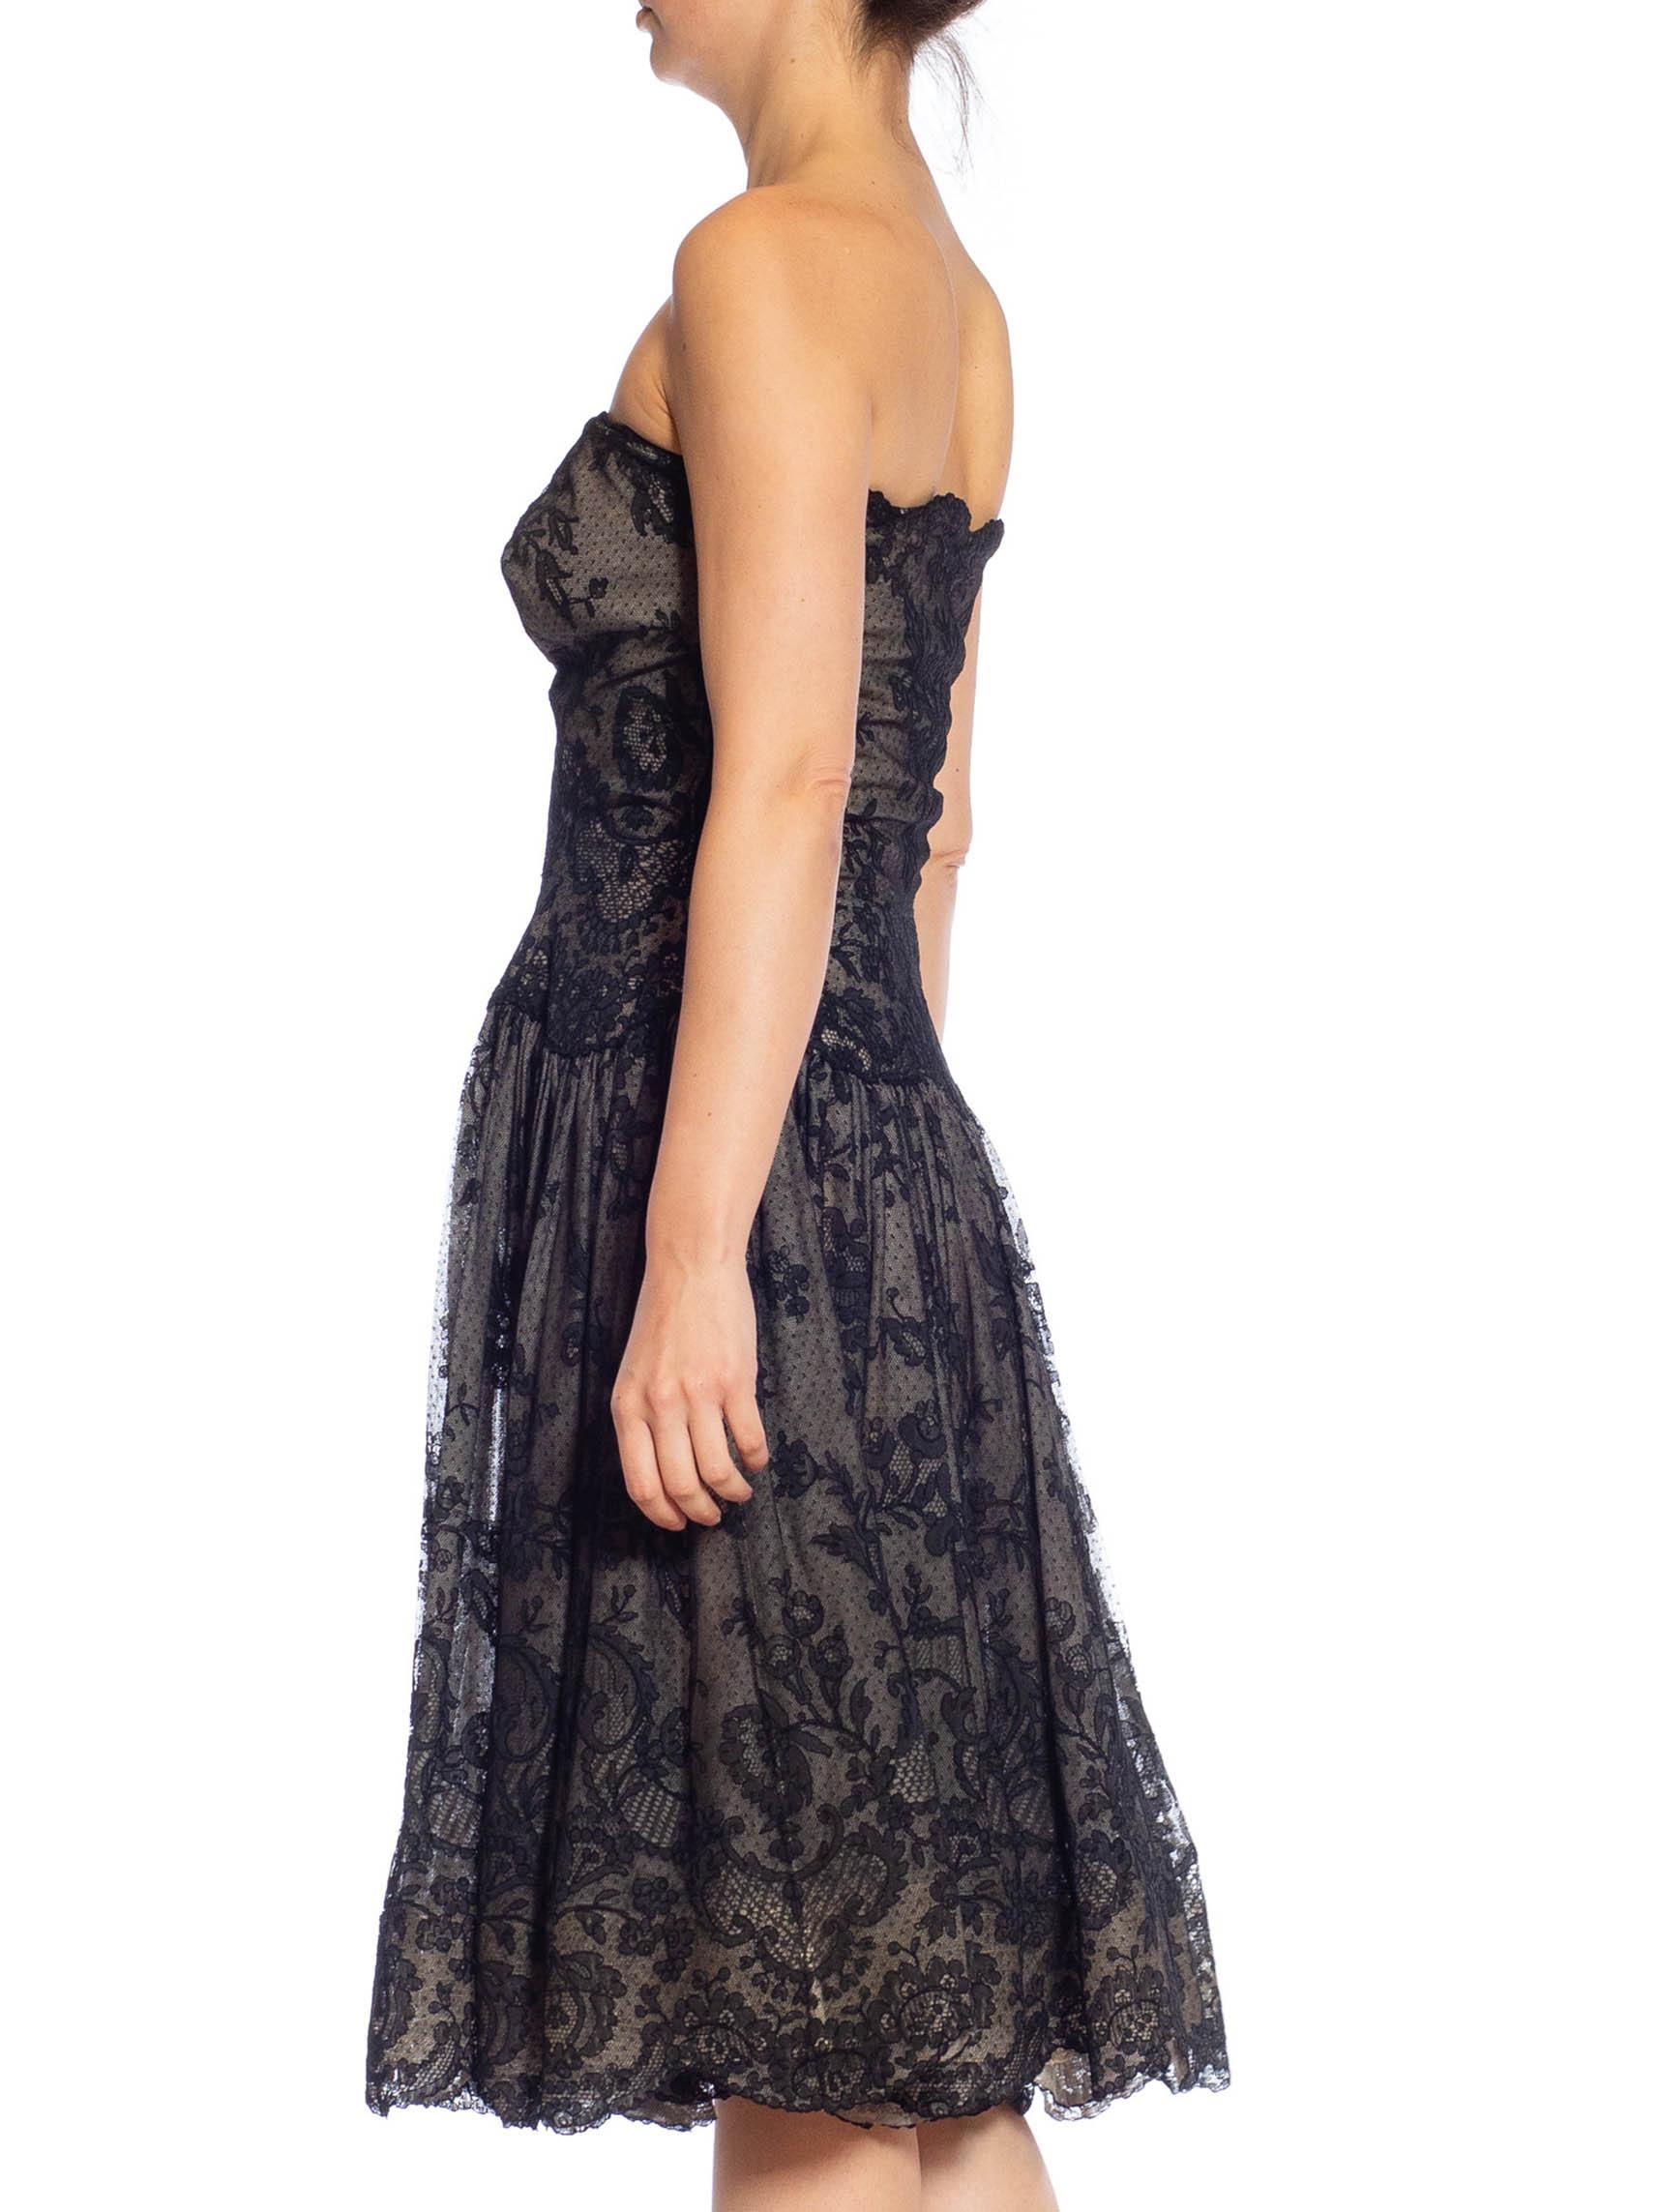 Beautiful very expensive silk Chantilly lace hand made and finished in France 1950S Black Floral Lace Strapless Fit & Flare Cocktail Dress From Paris 